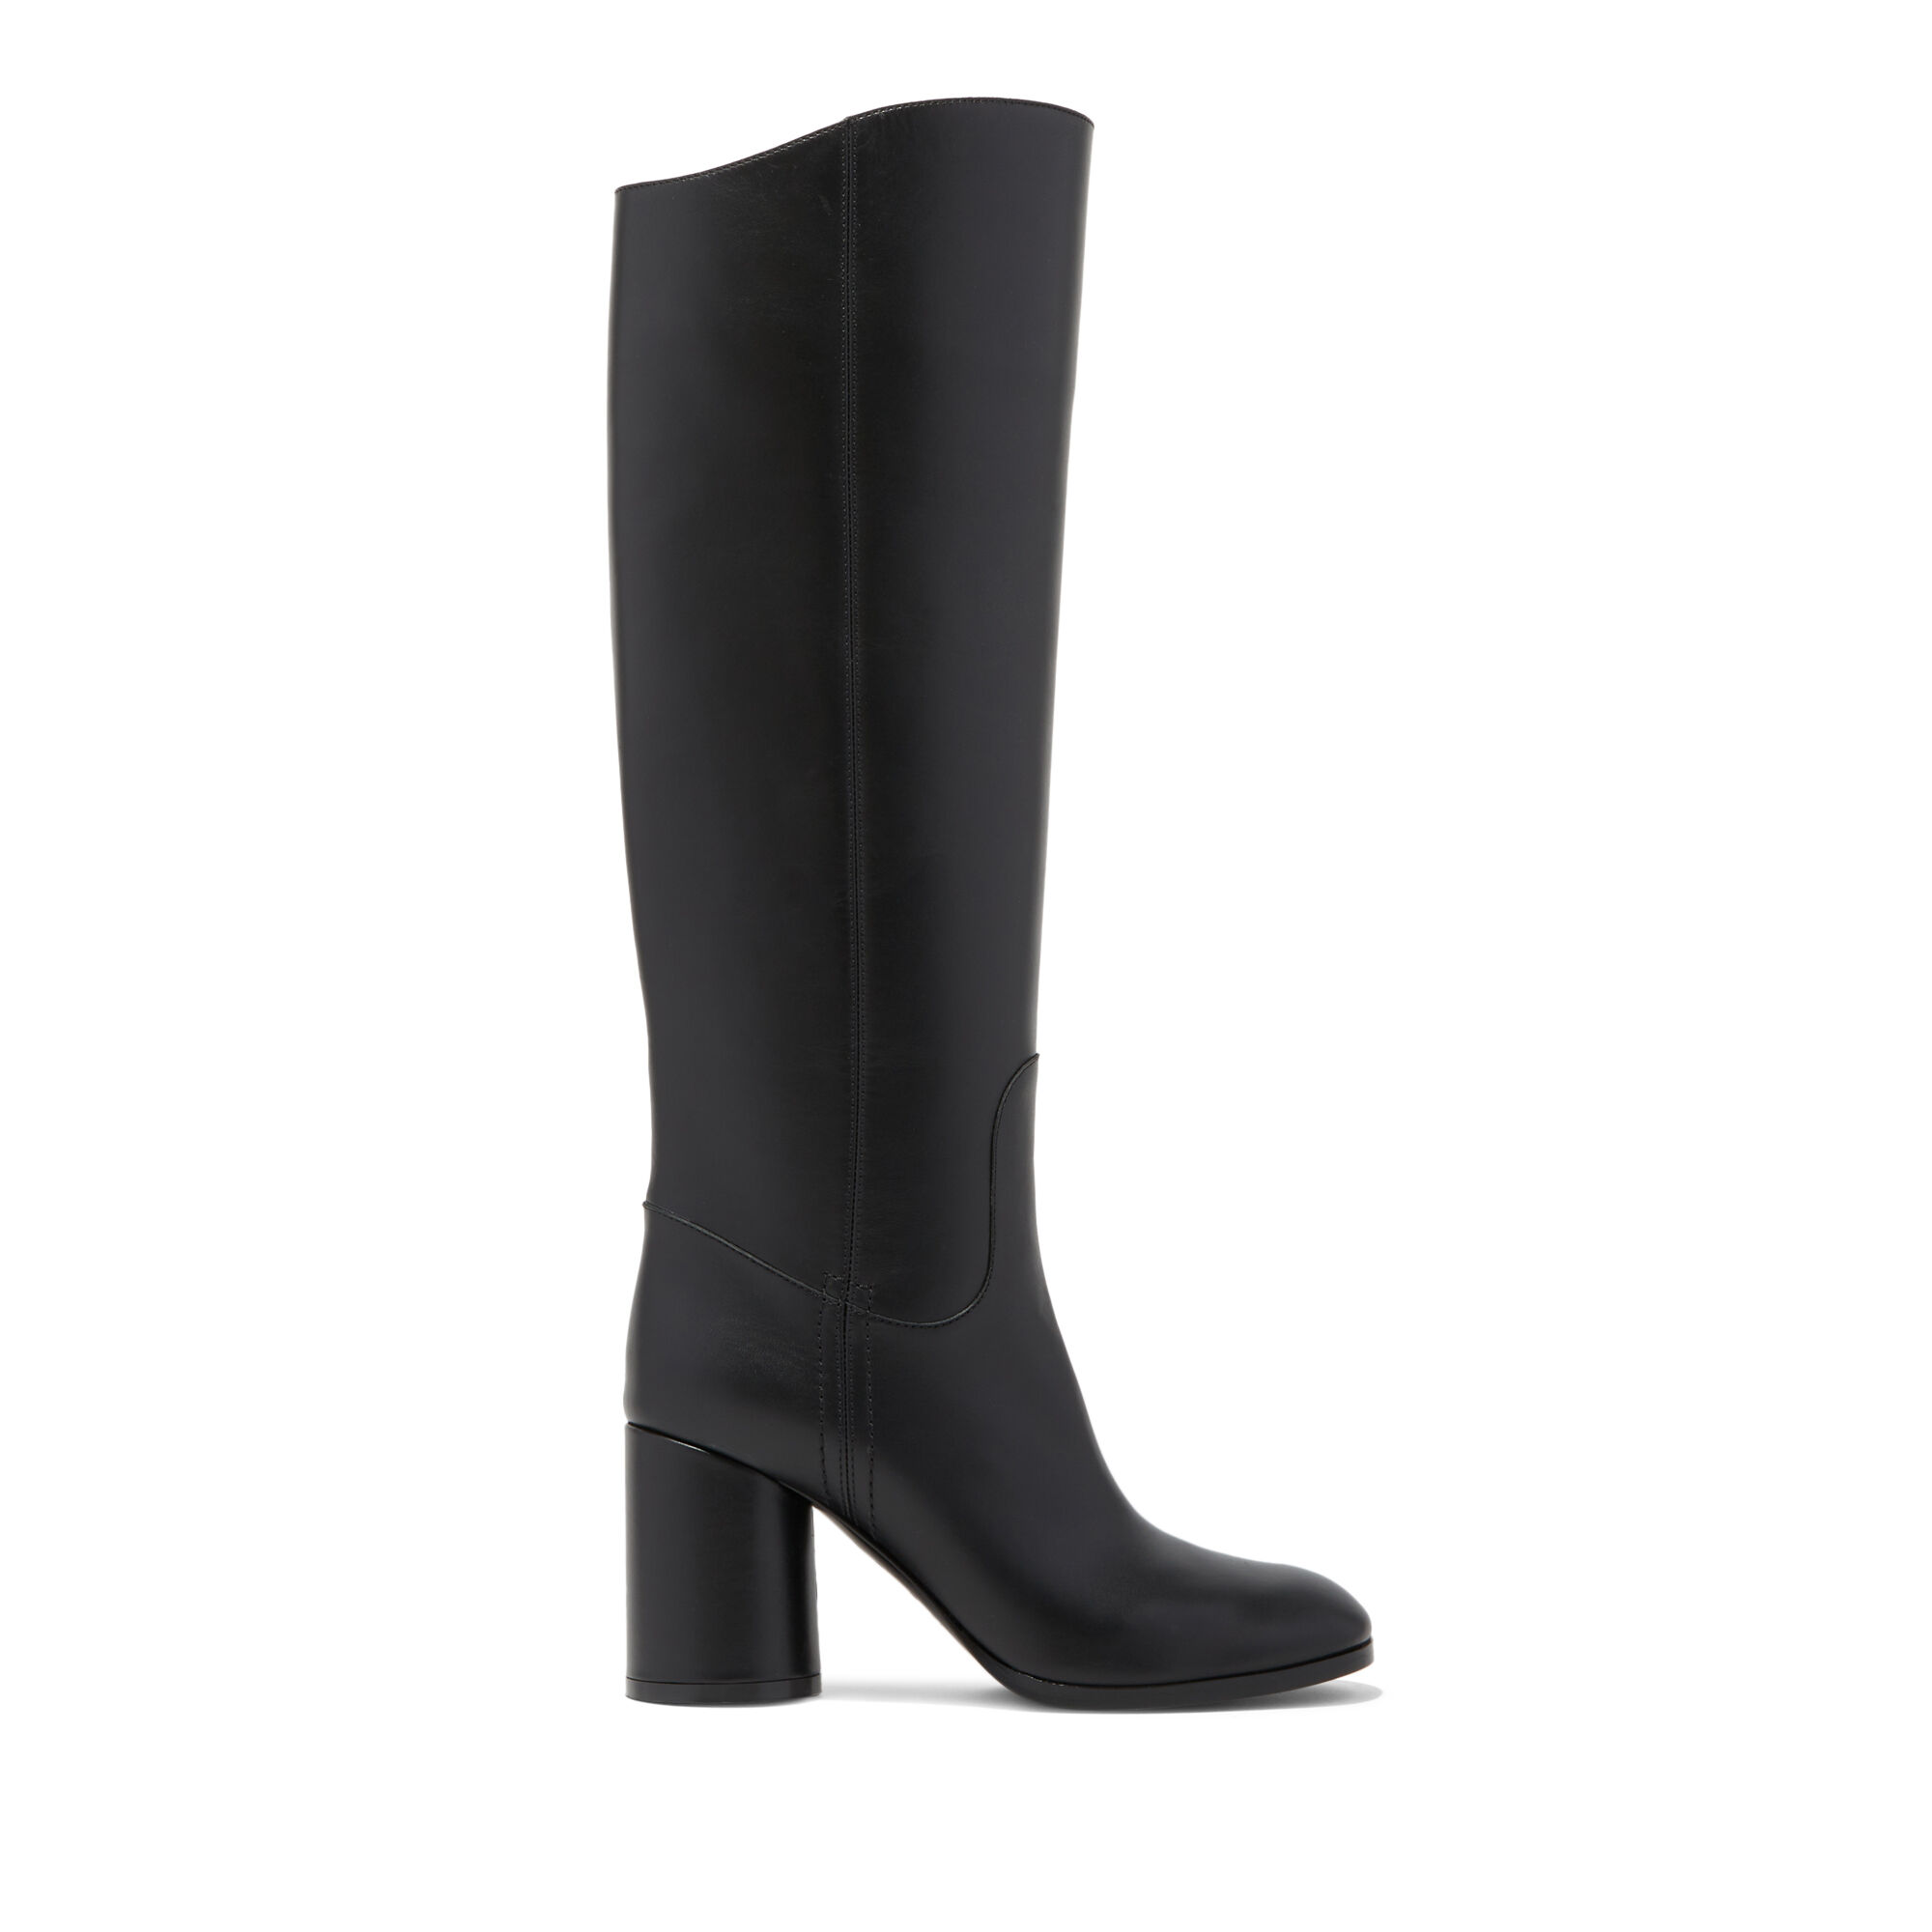 Cleo Leather High Boots in Black for Women | Casadei®